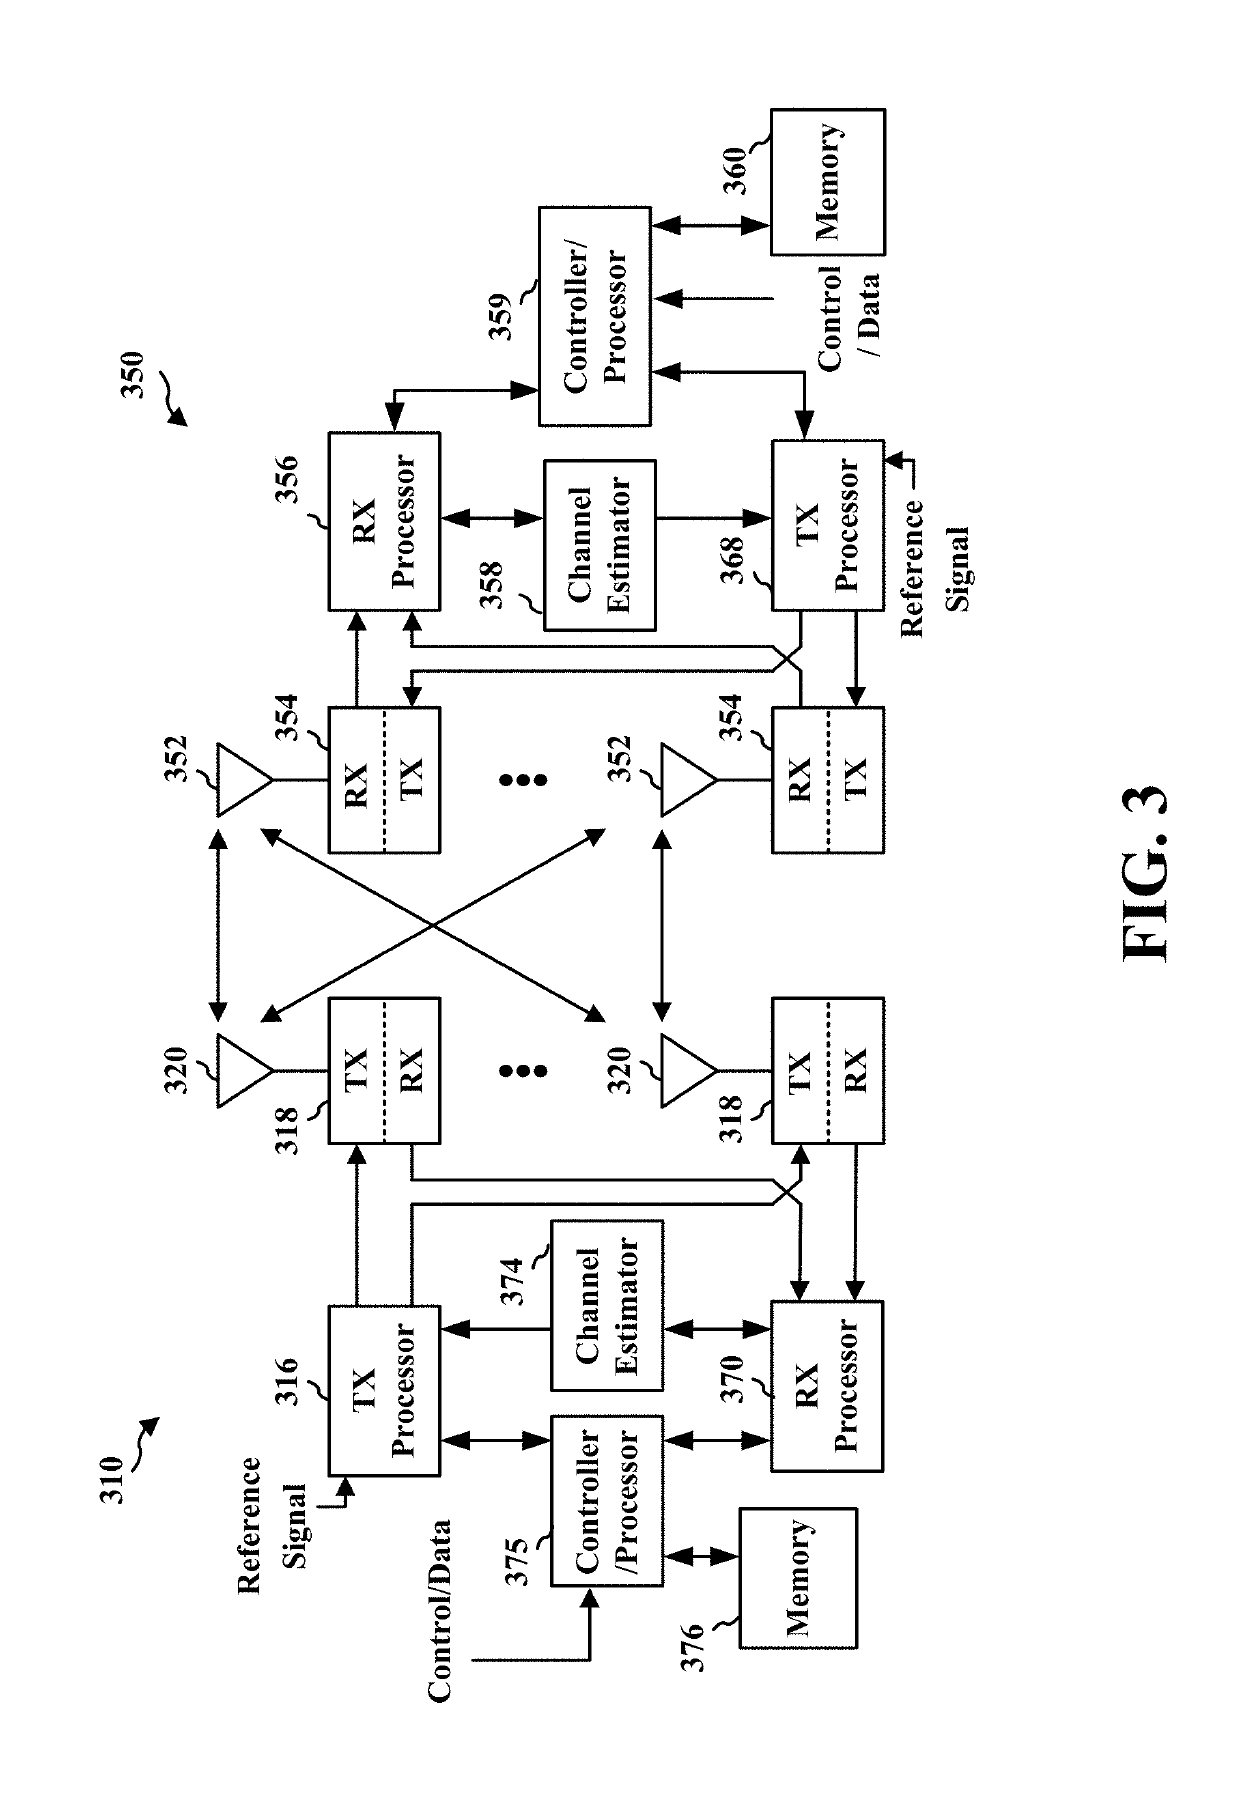 System and method for locating a downlink data channel